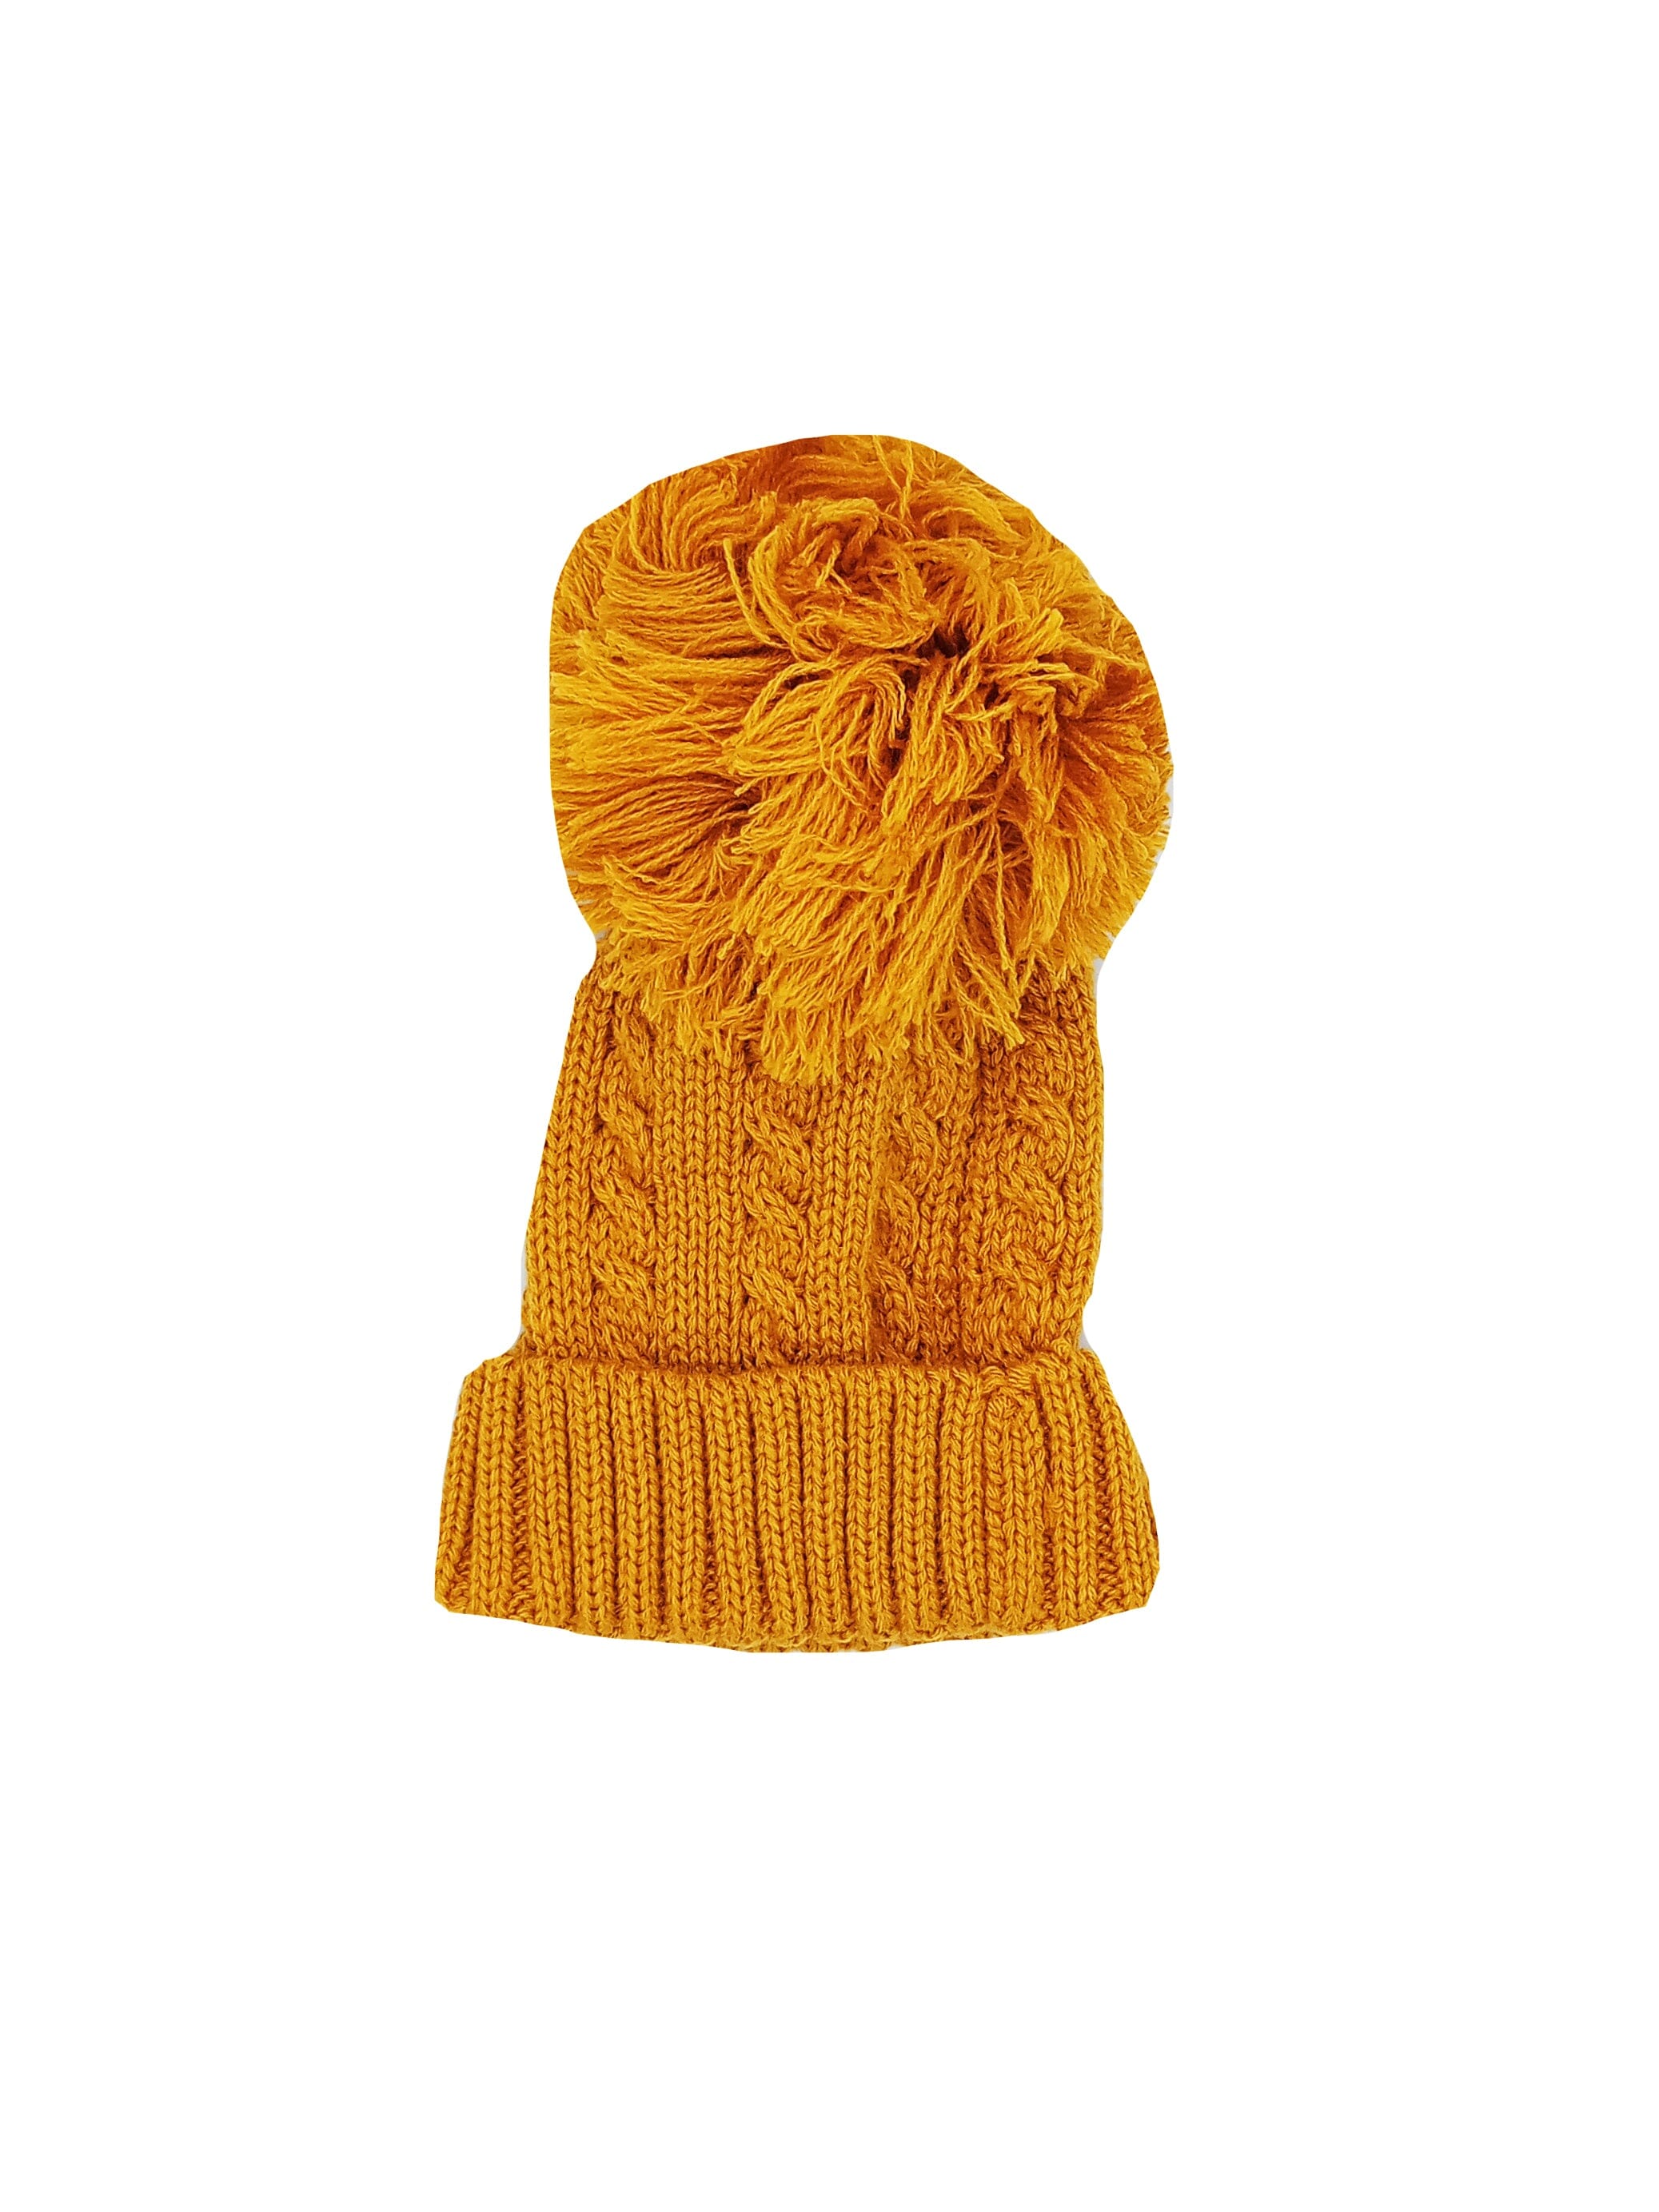 Mustard Cable Knitted Pom Pom Hat - Hat - Little Mouse Baby Clothing and Gifts Ltd